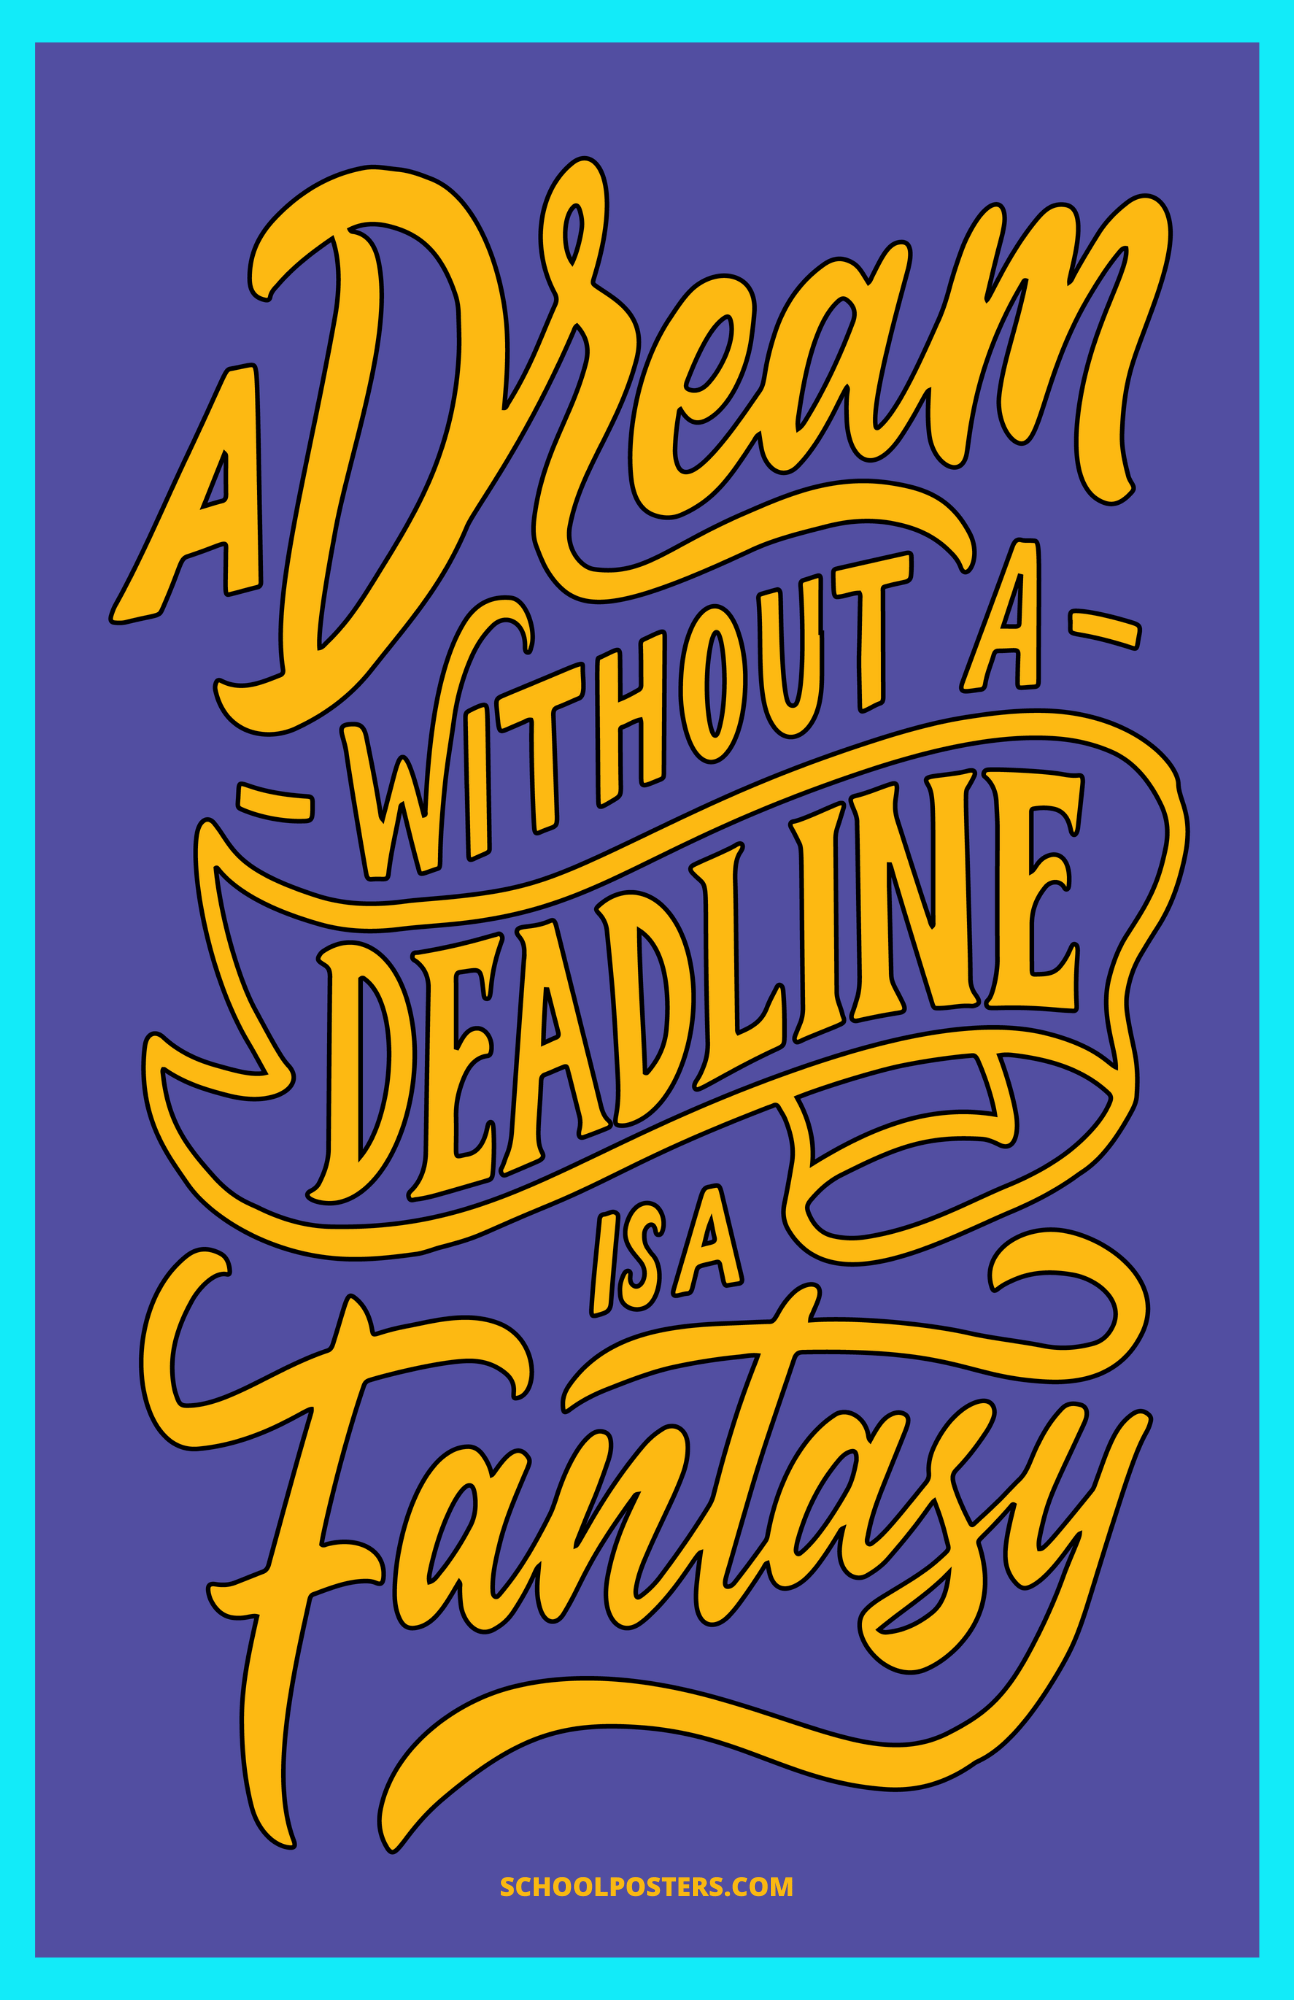 A Dream Without A Deadline Poster